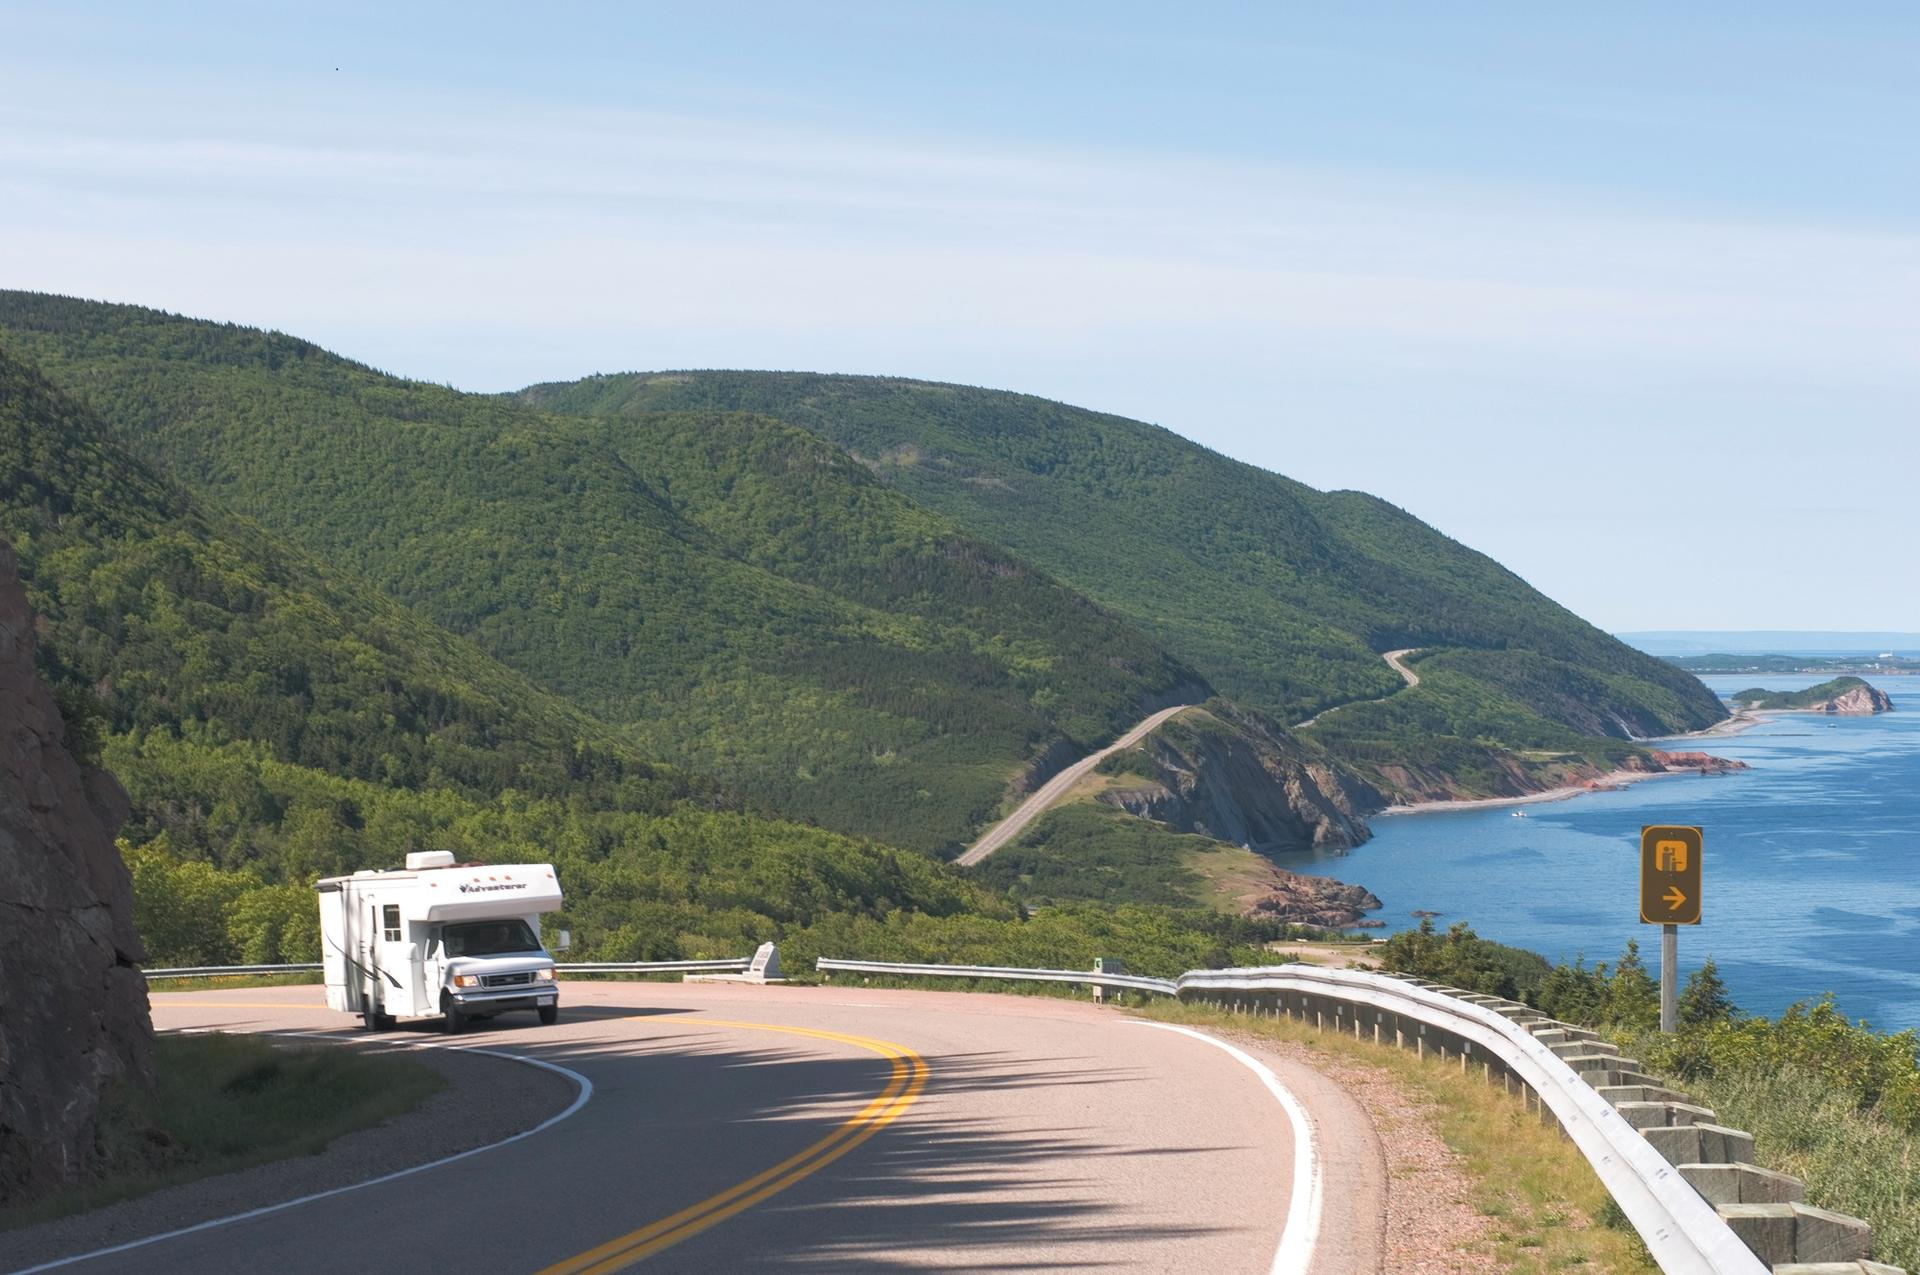 RVing the Cabot Trail